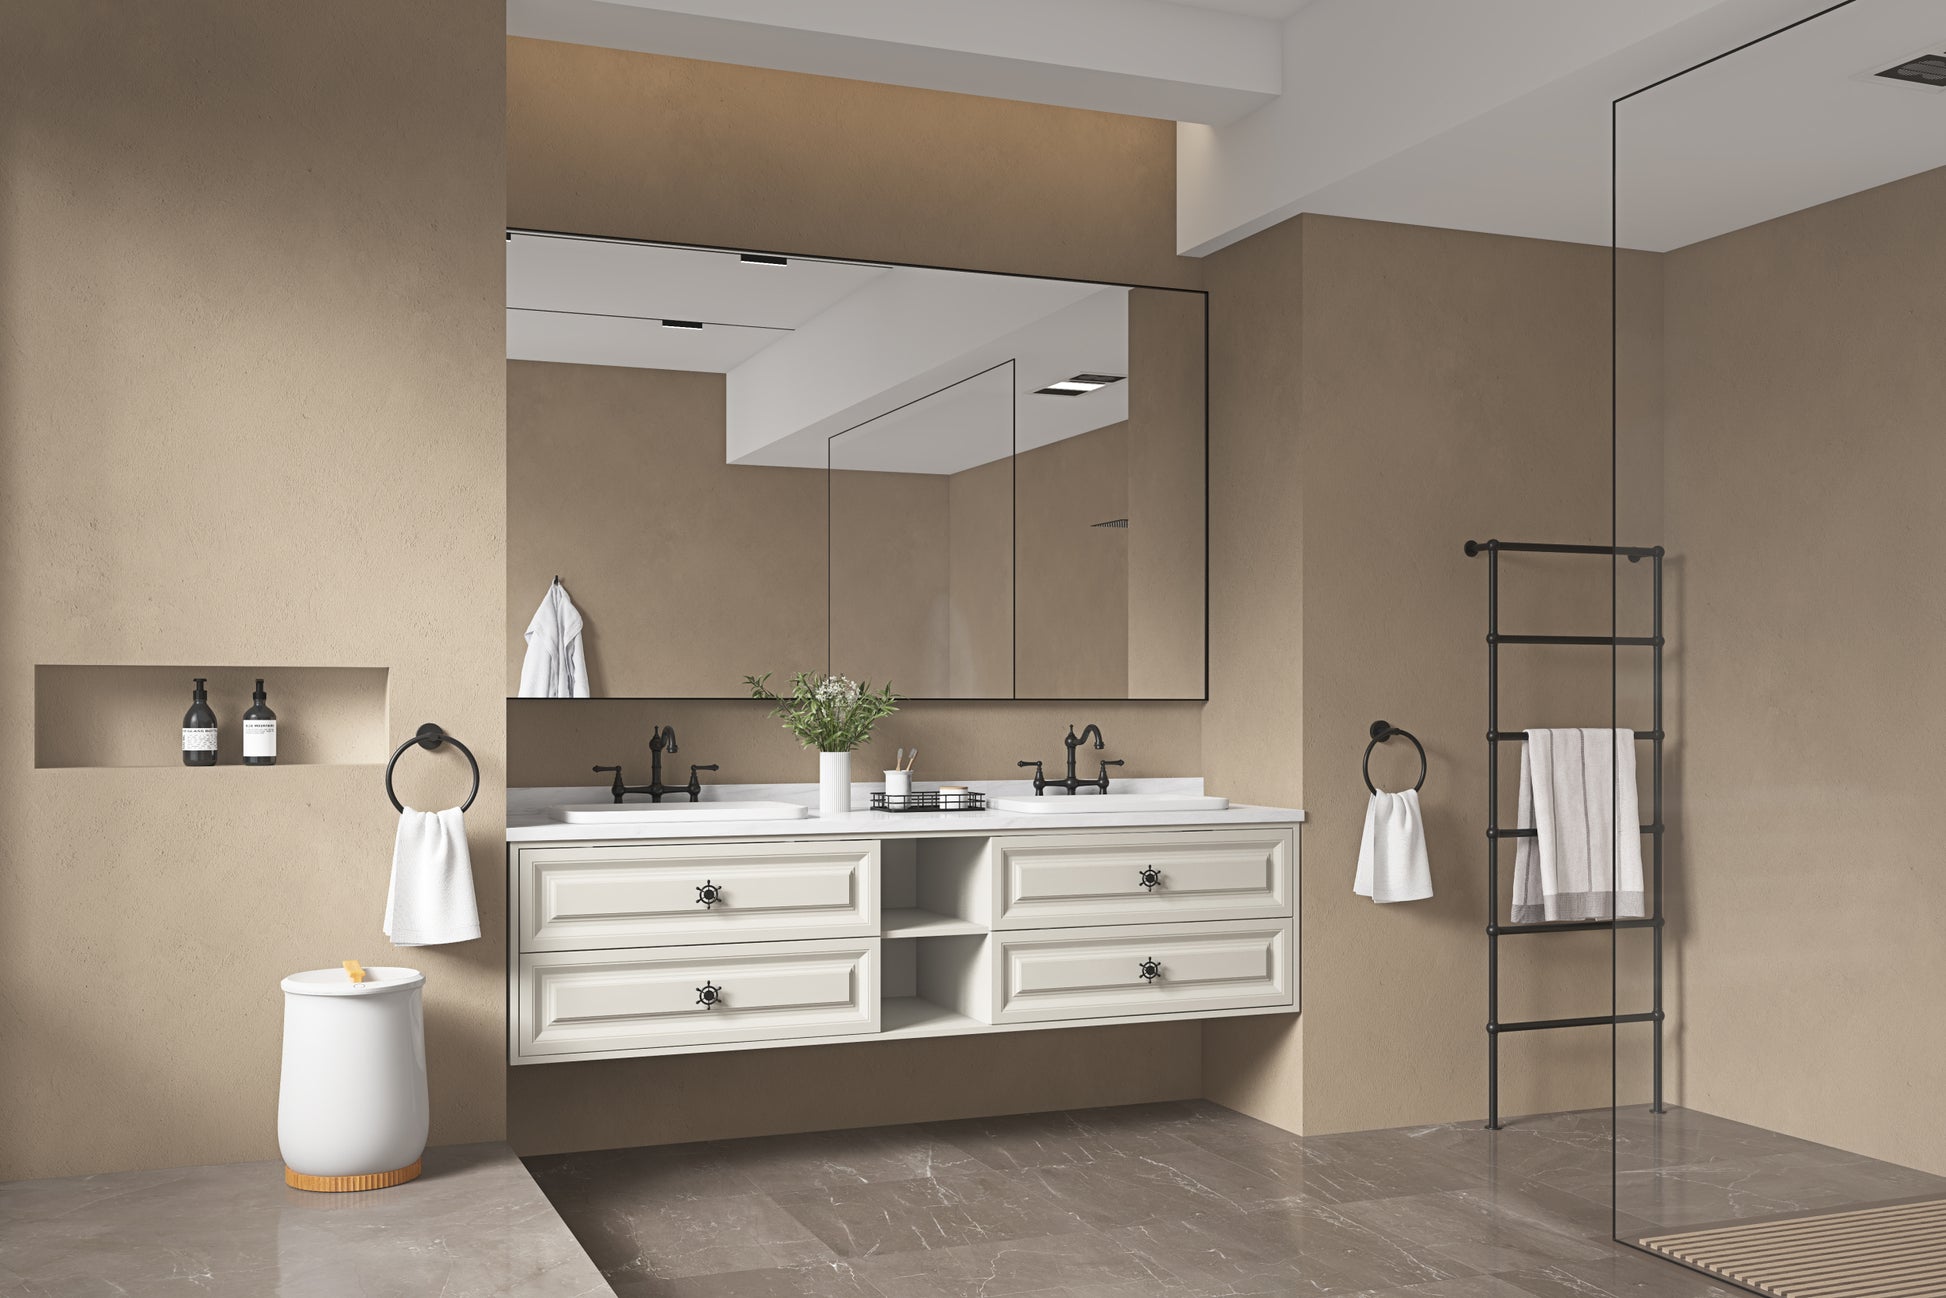 96*23*21in Wall Hung Doulble Sink Bath Vanity Cabinet khaki-abs+steel(q235)+wood+pvc